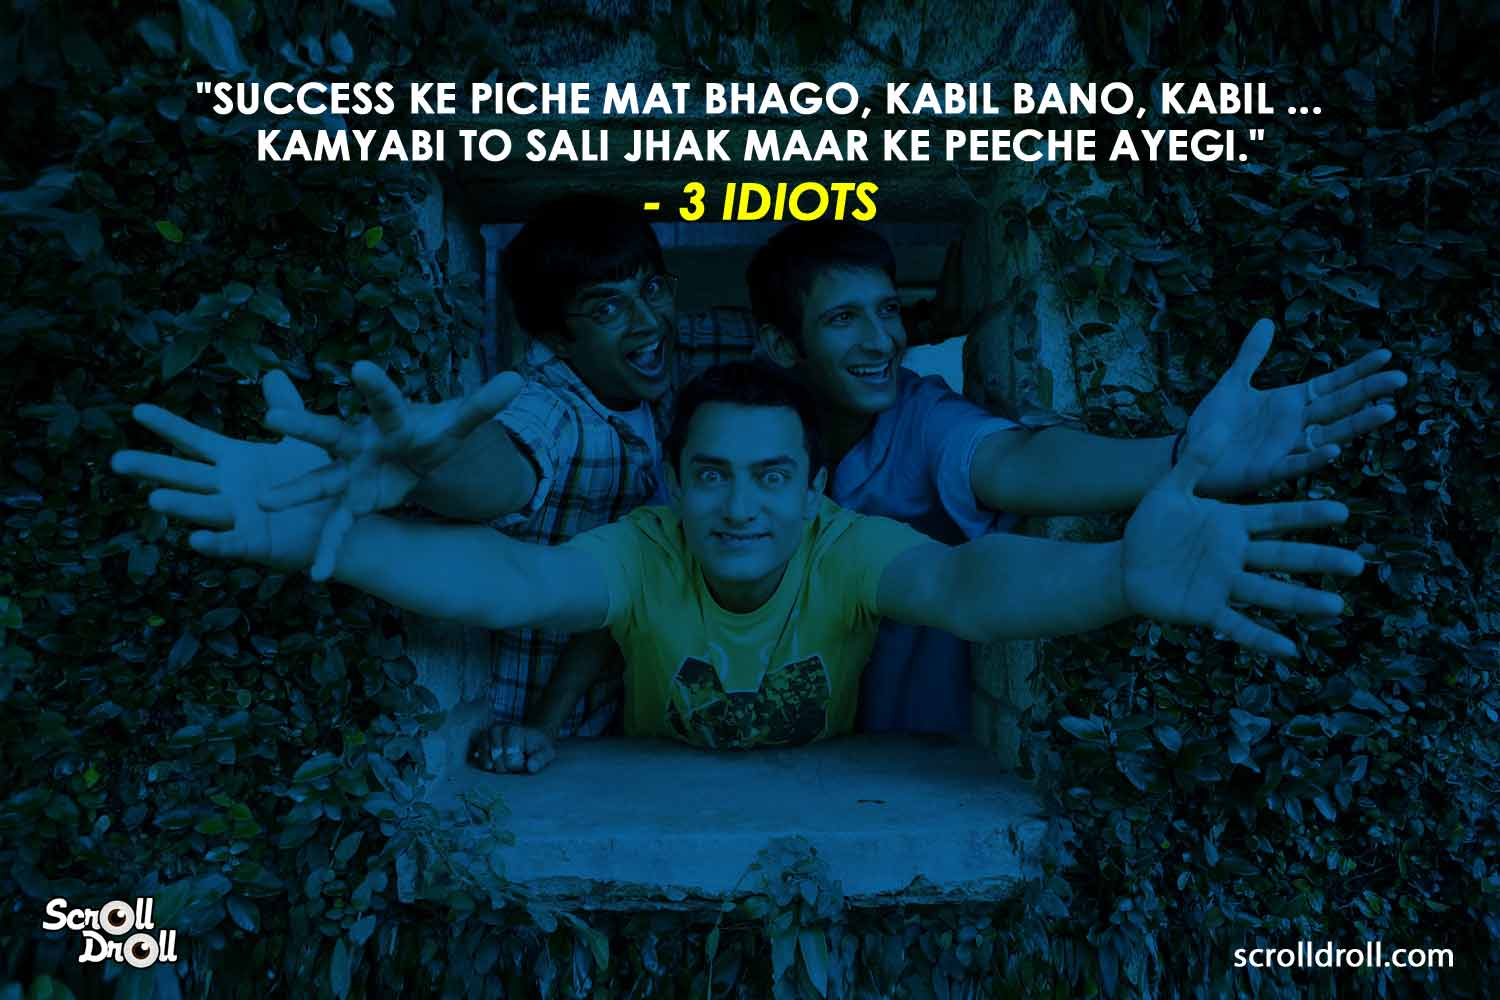 18 Inspirational Bollywood Dialogues Quotes That Can Change Your Life